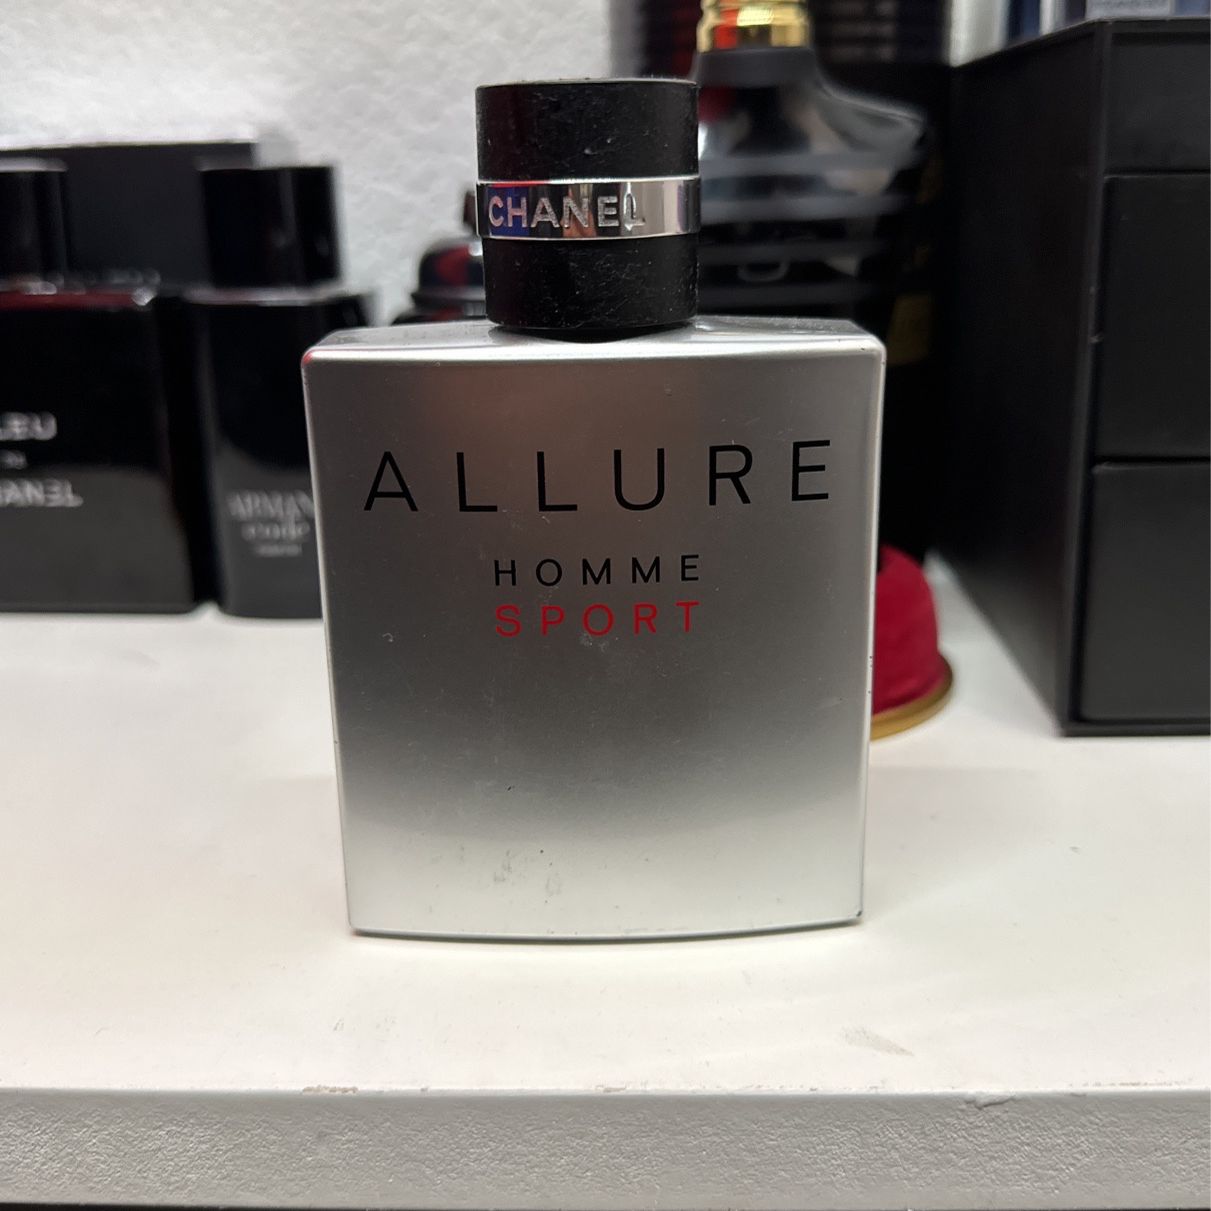 Chanel Allure Homme Sport 3.4oz for Sale in Midland, TX - OfferUp